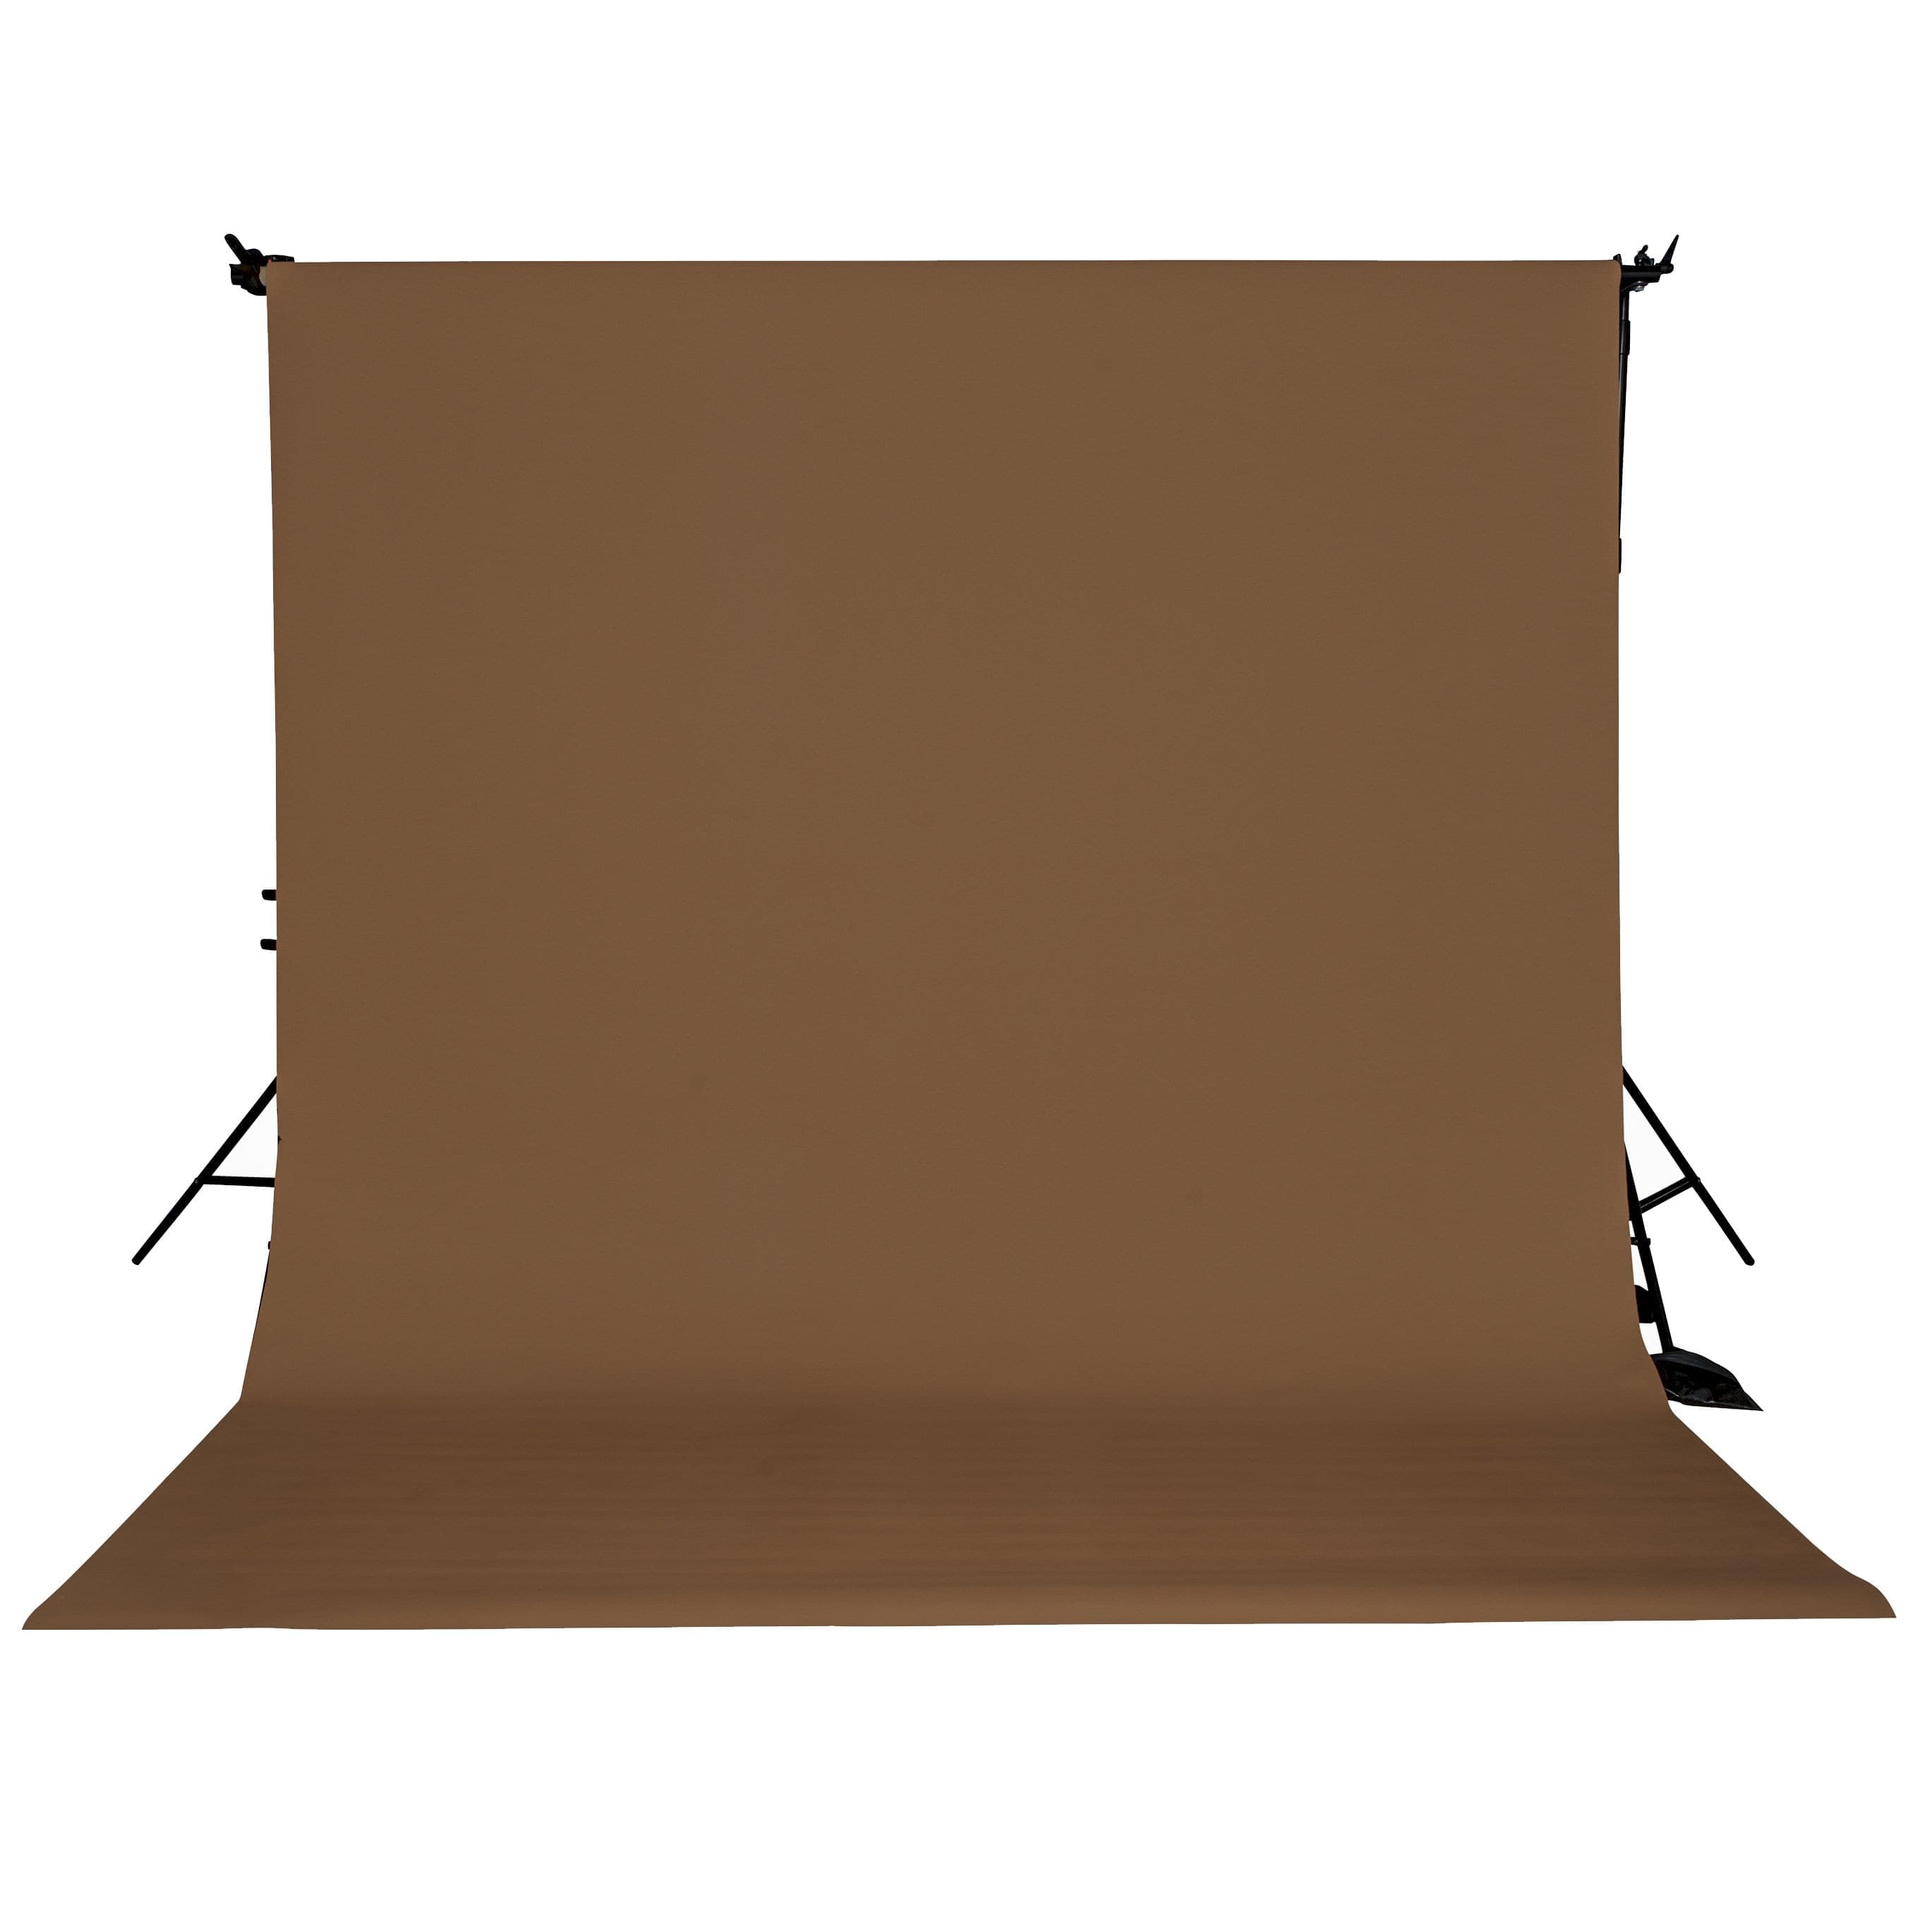 Spectrum Non-Reflective Full Paper Roll Backdrop (2.7 x 8M approx.) - Mochaccino Brown (DEMO STOCK)